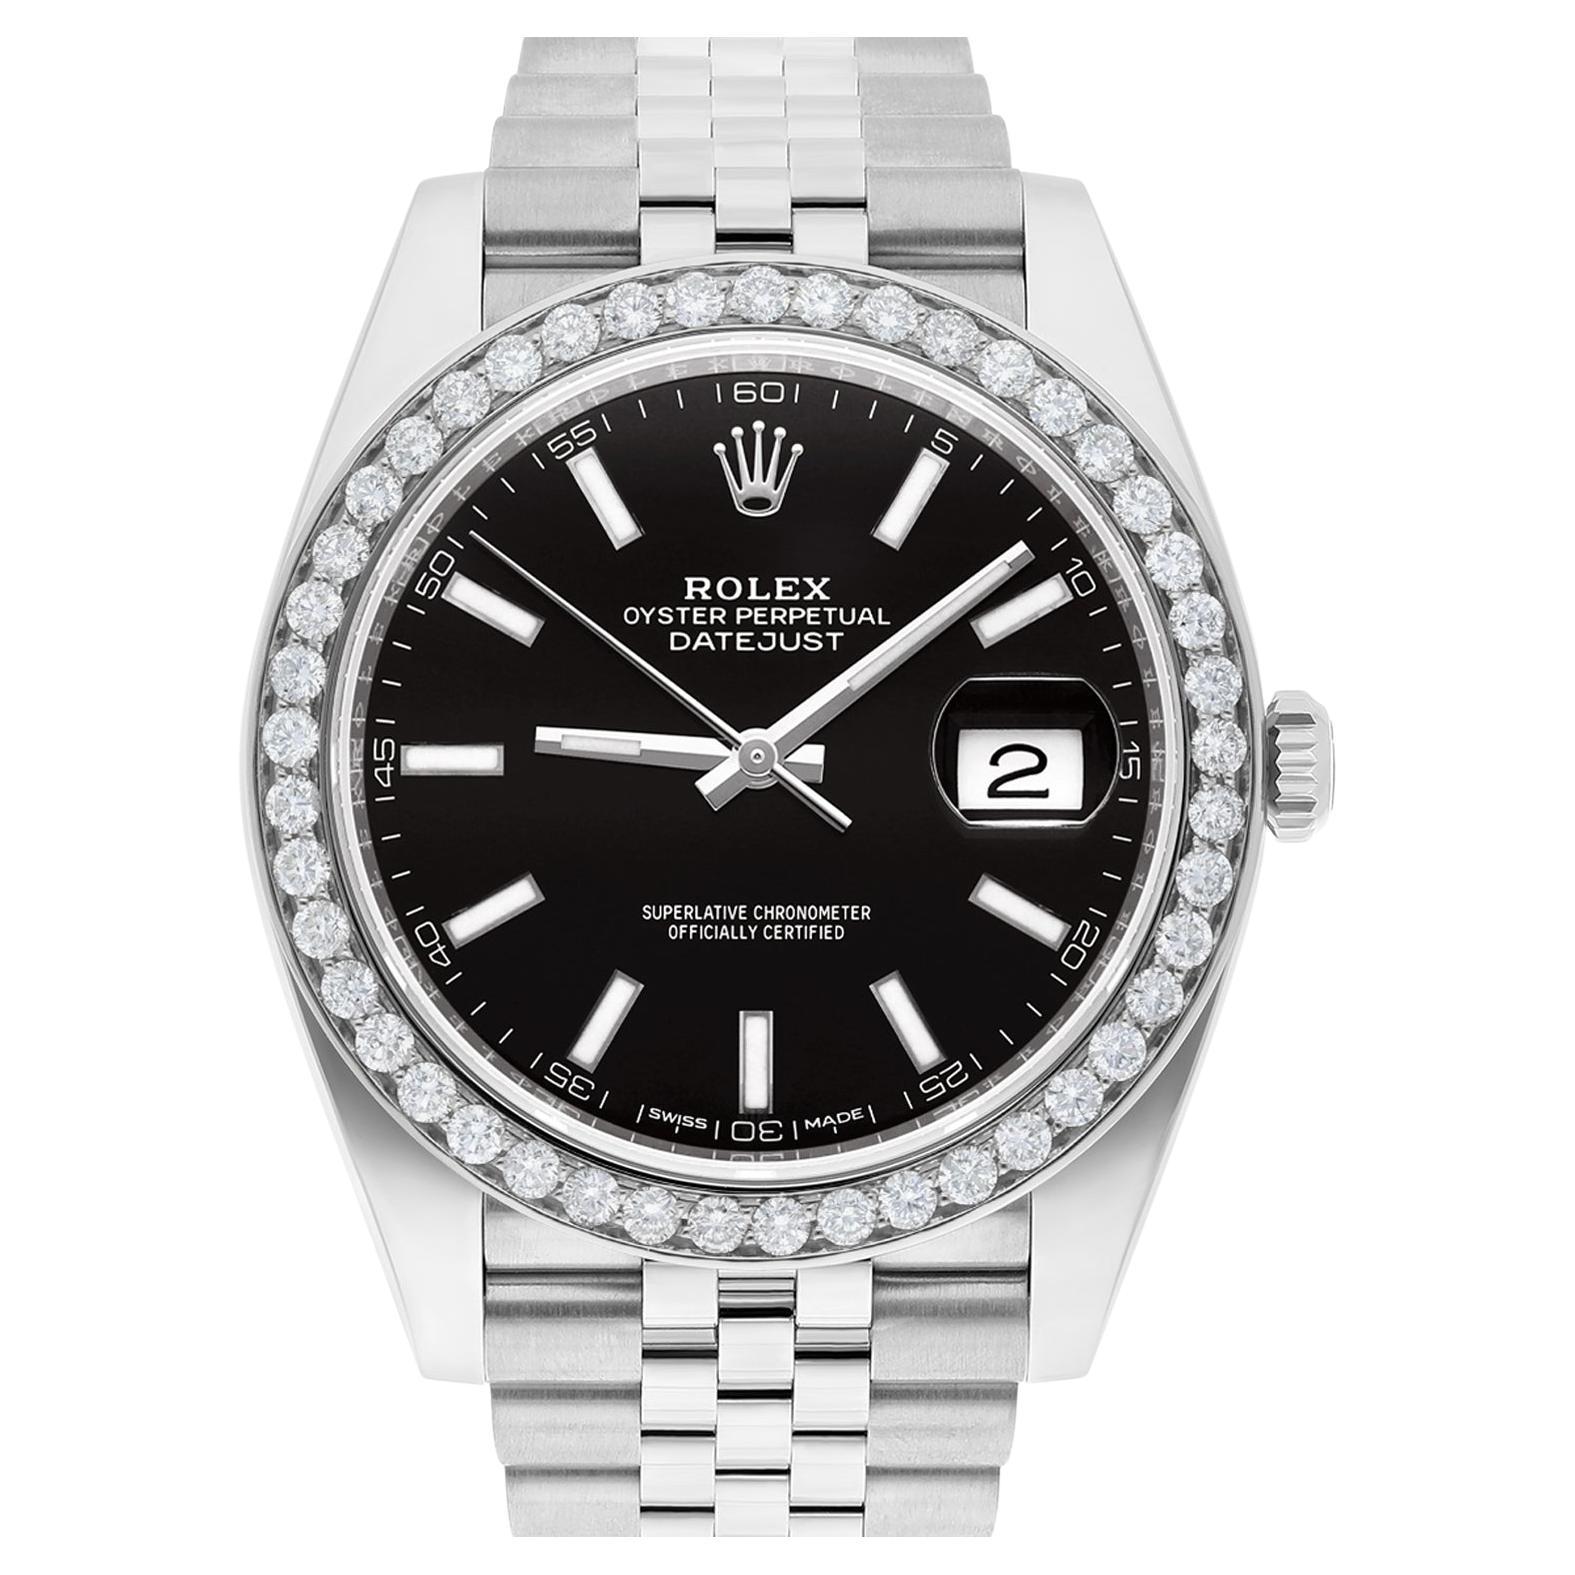 How do I change the time on my Rolex?